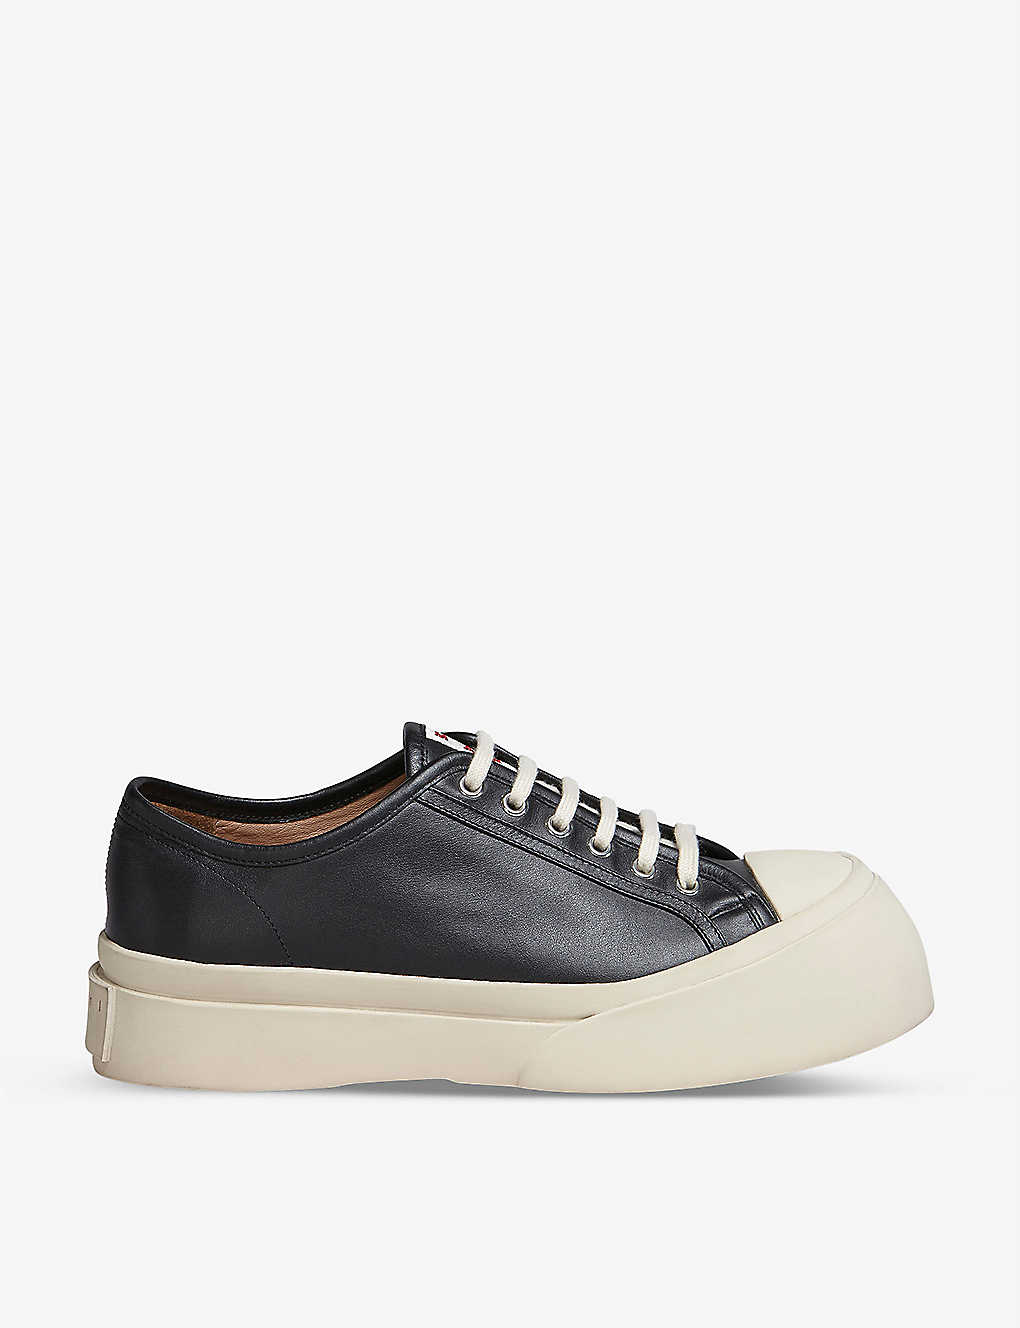 Marni Womens Black Pablo Platform-sole Leather Low-top Trainers